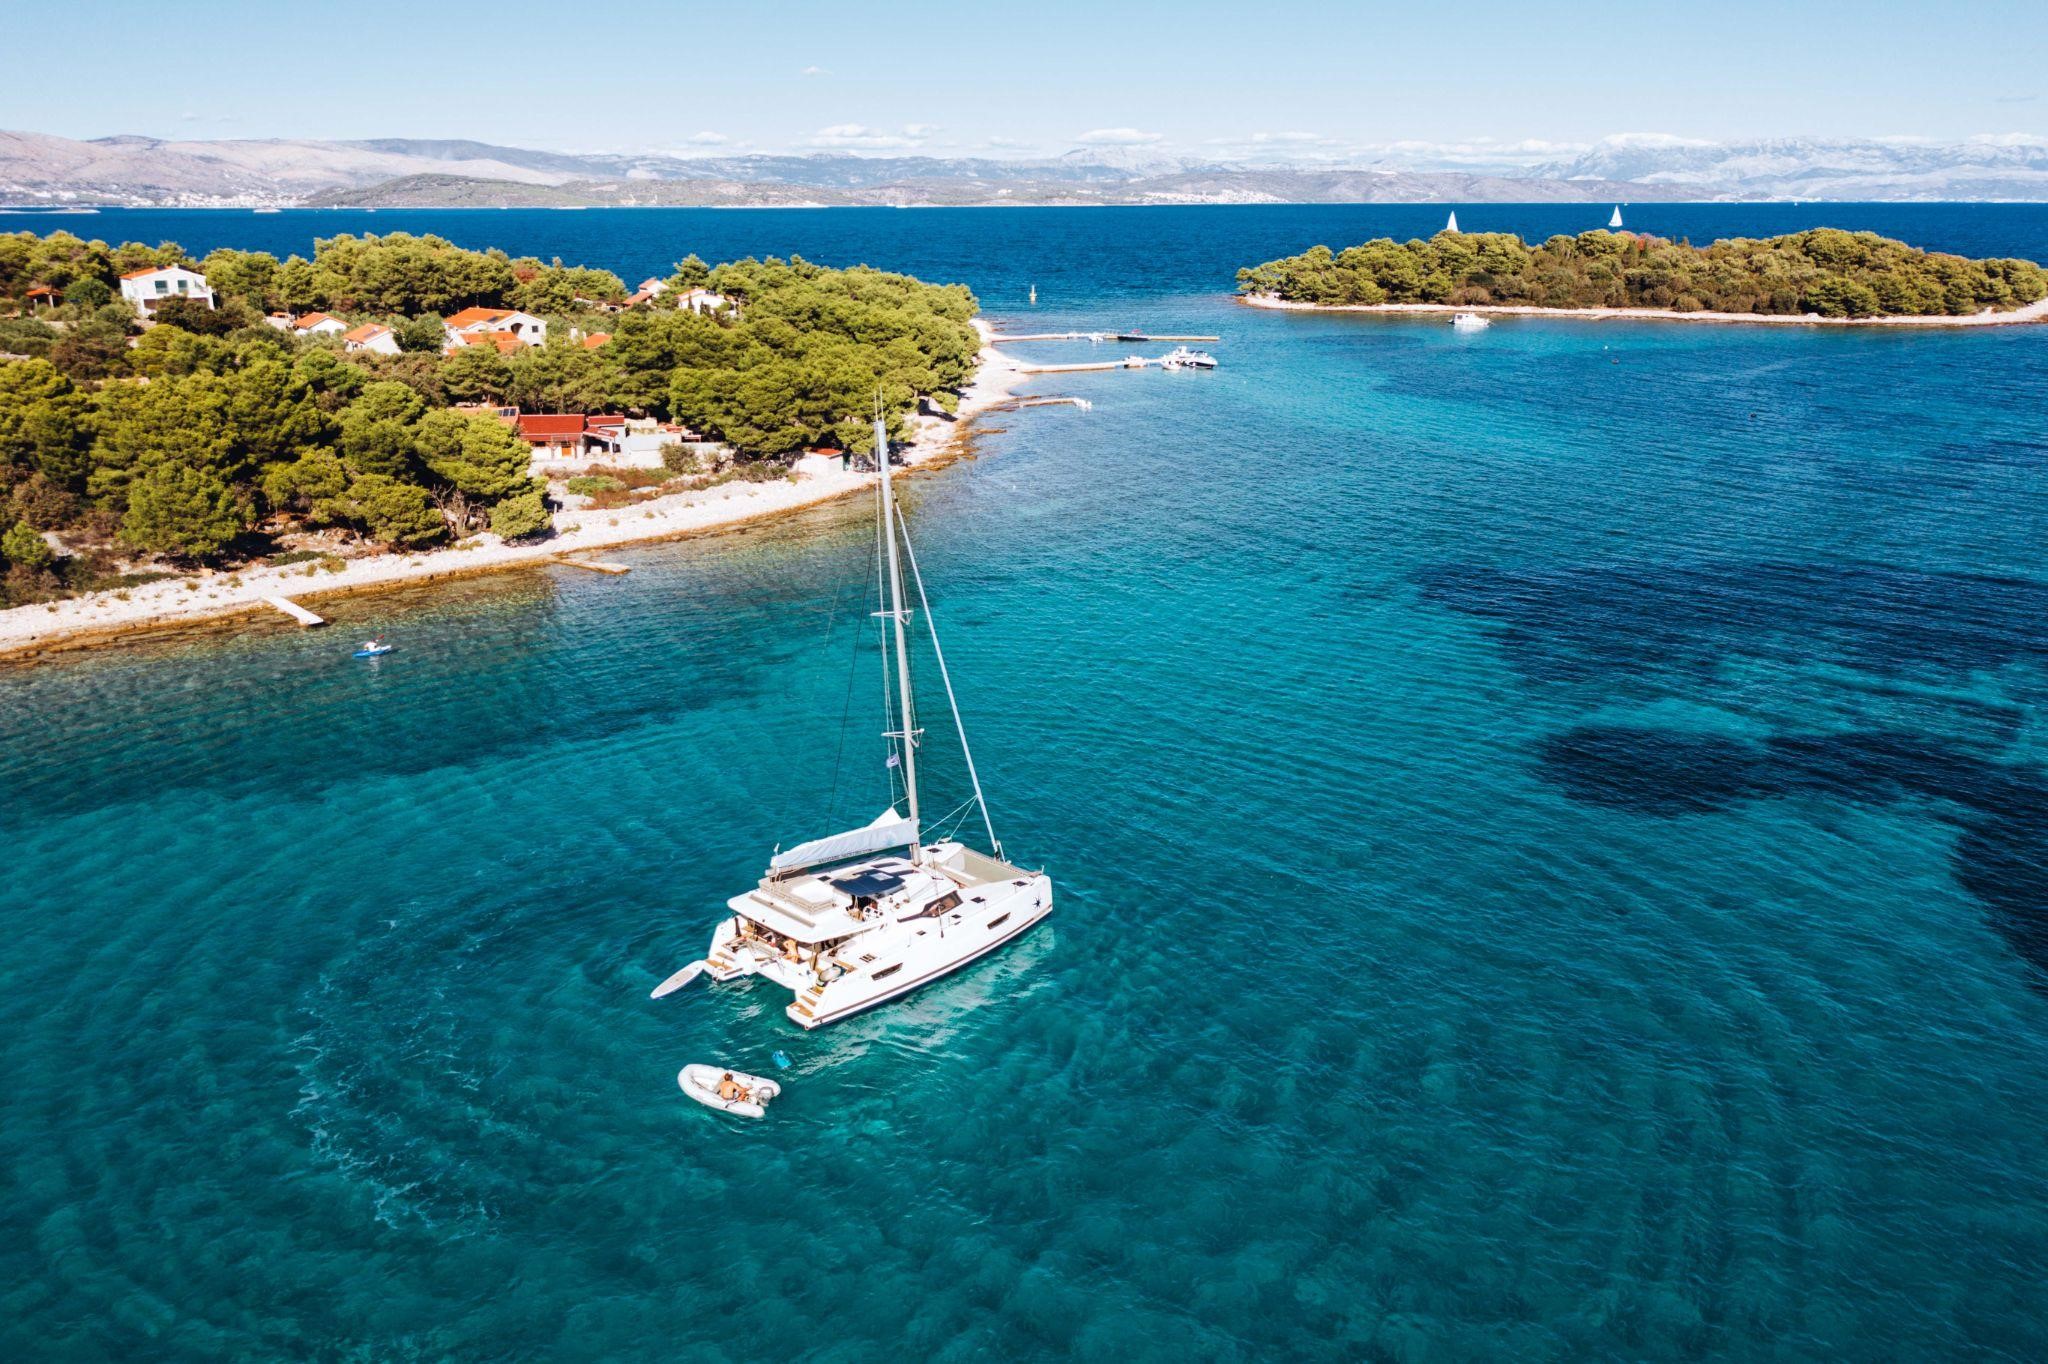 10 Reasons to go on a Sailing Vacation